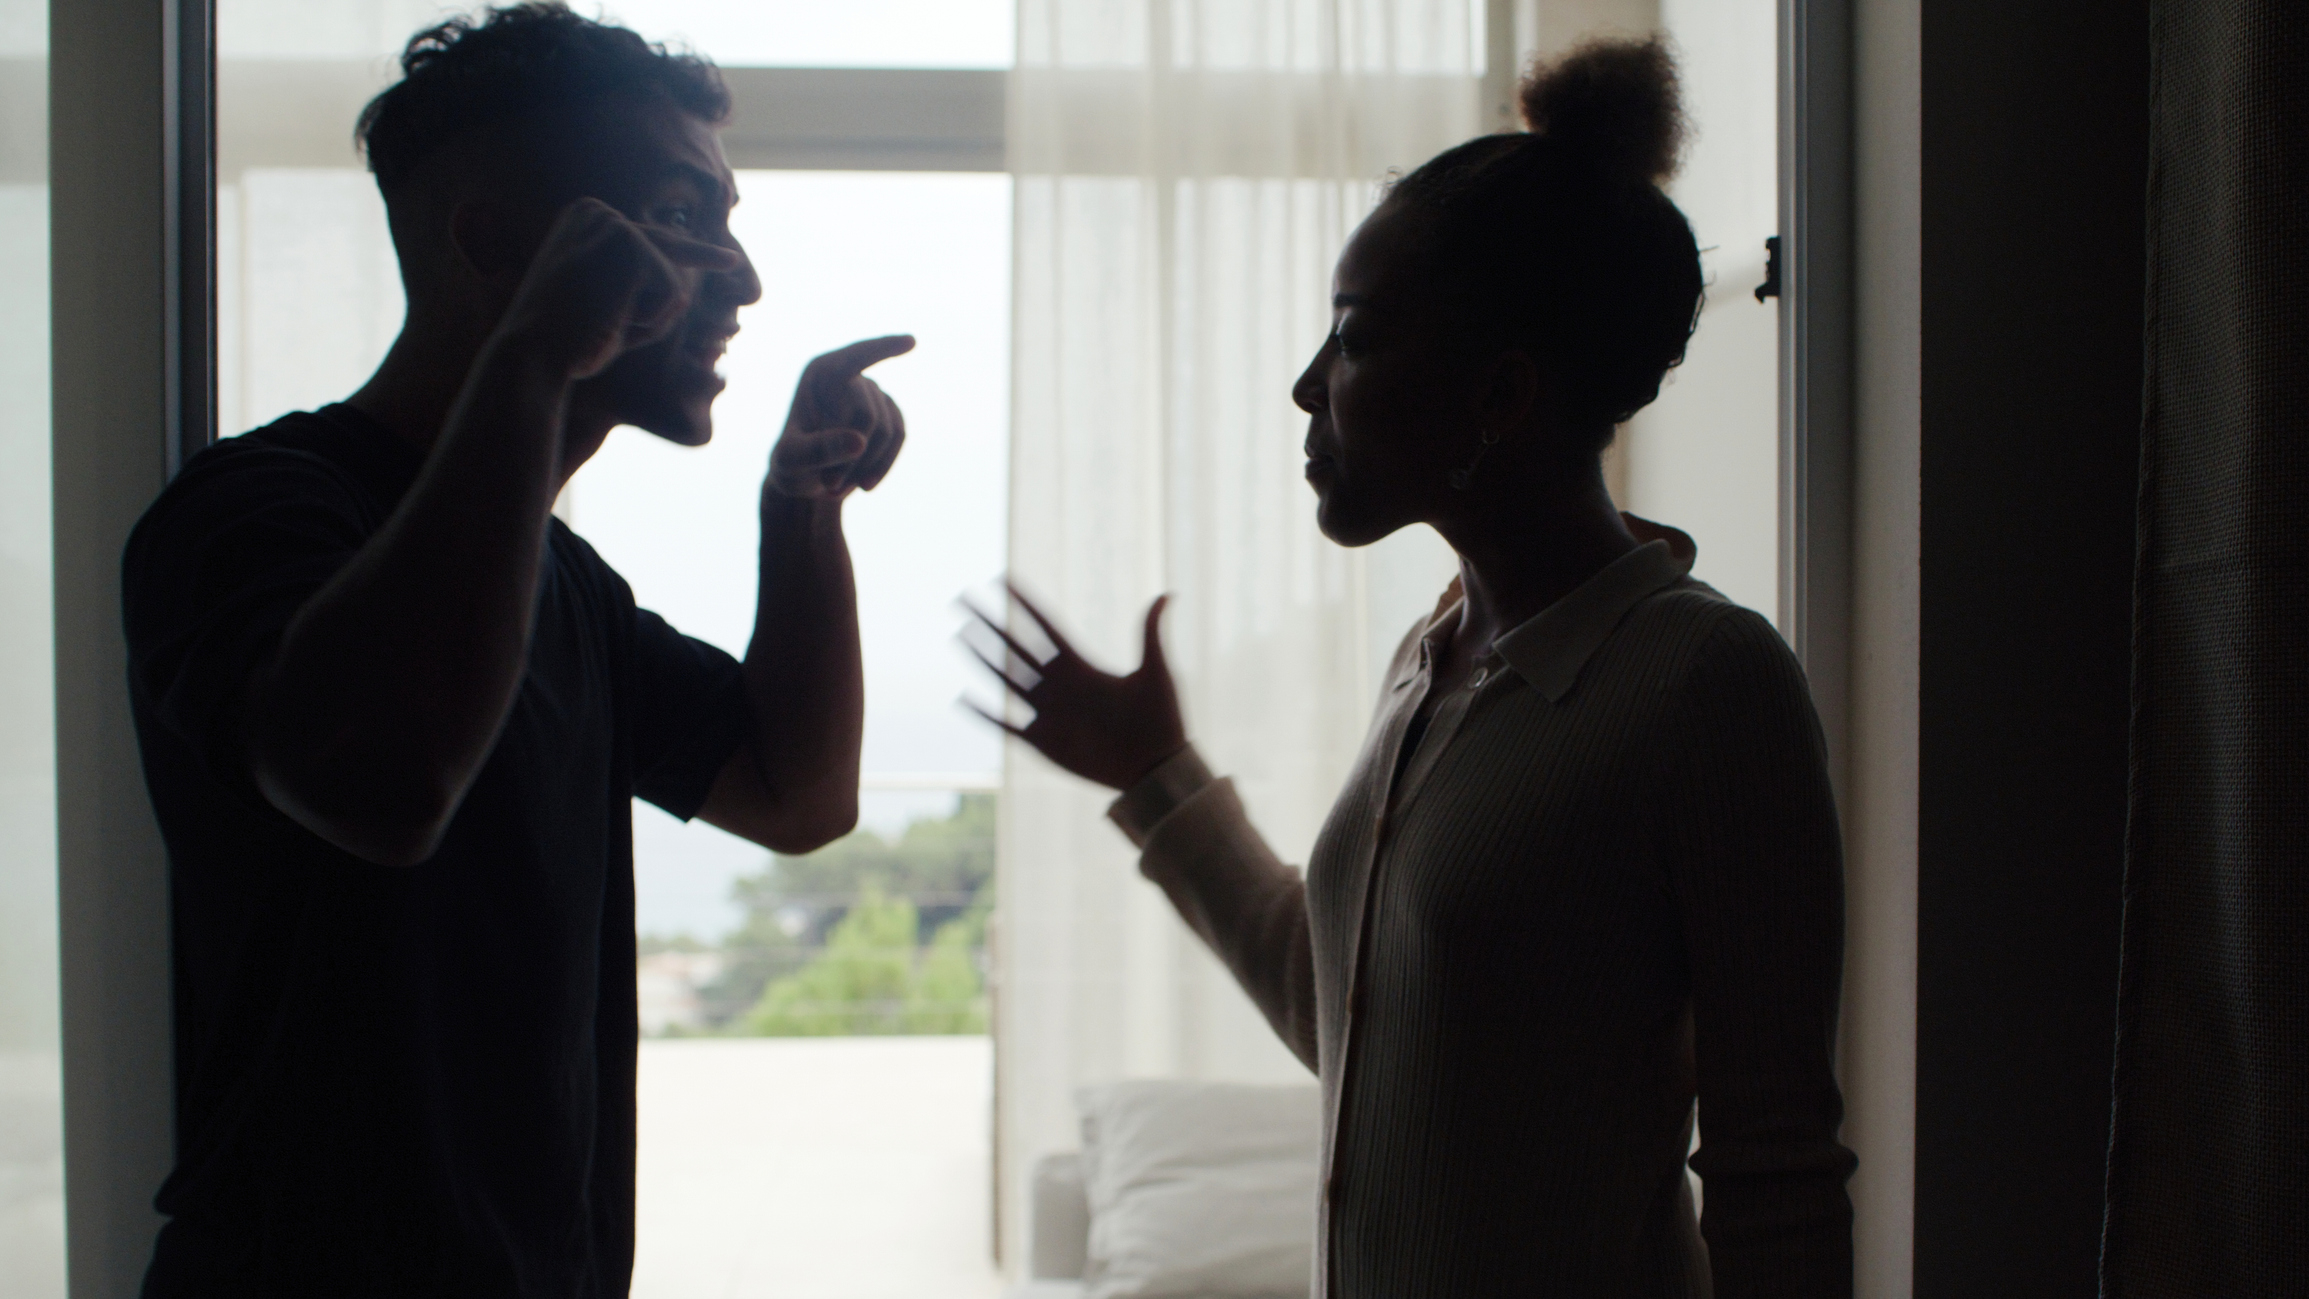 Two people engaged in a conversation with expressive hand gestures, silhouetted against a bright window